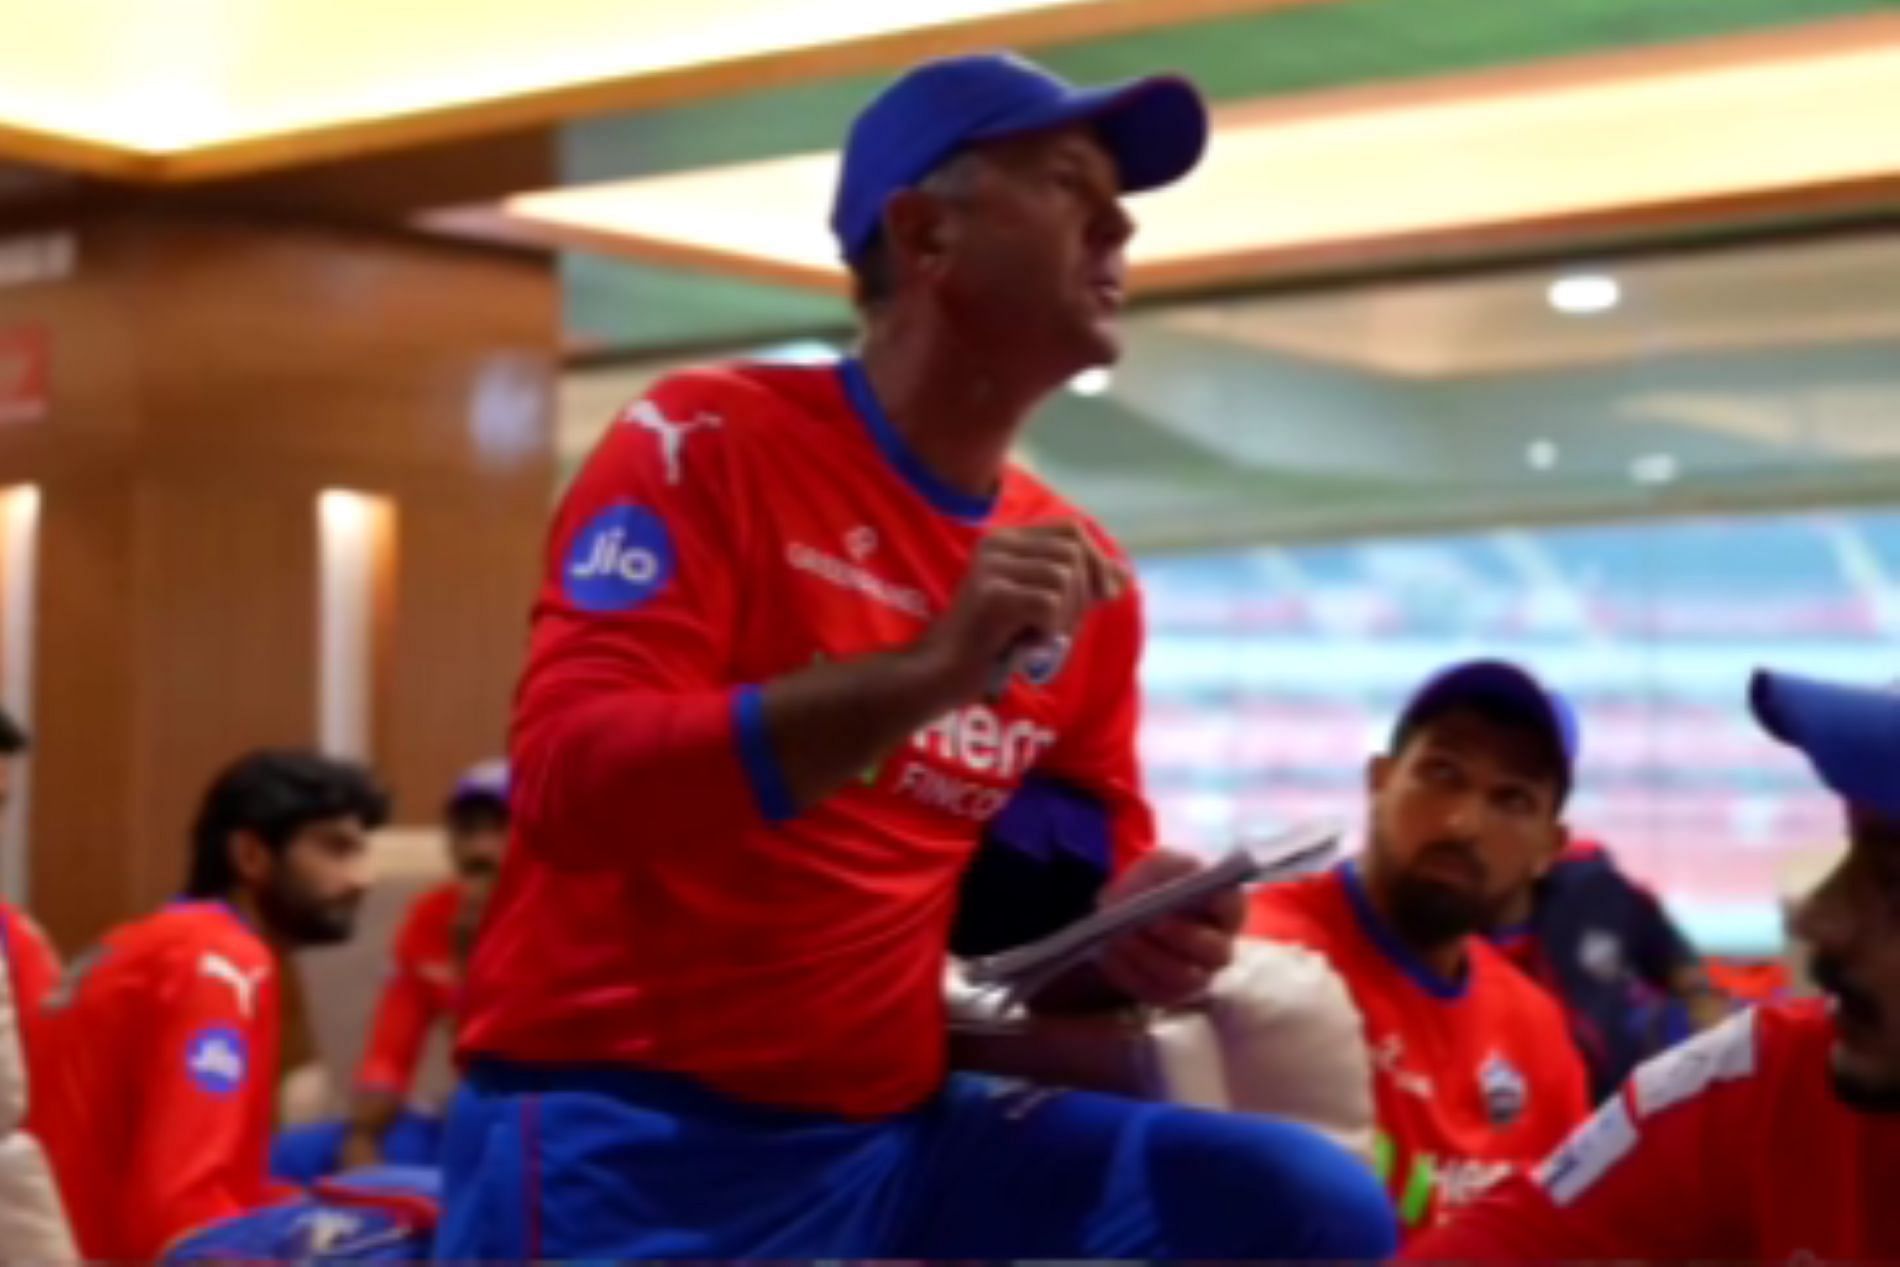 Ponting was upbeat despite the tough opening game loss to PBKS [ Credits: Delhi Capitals Twitter handle]